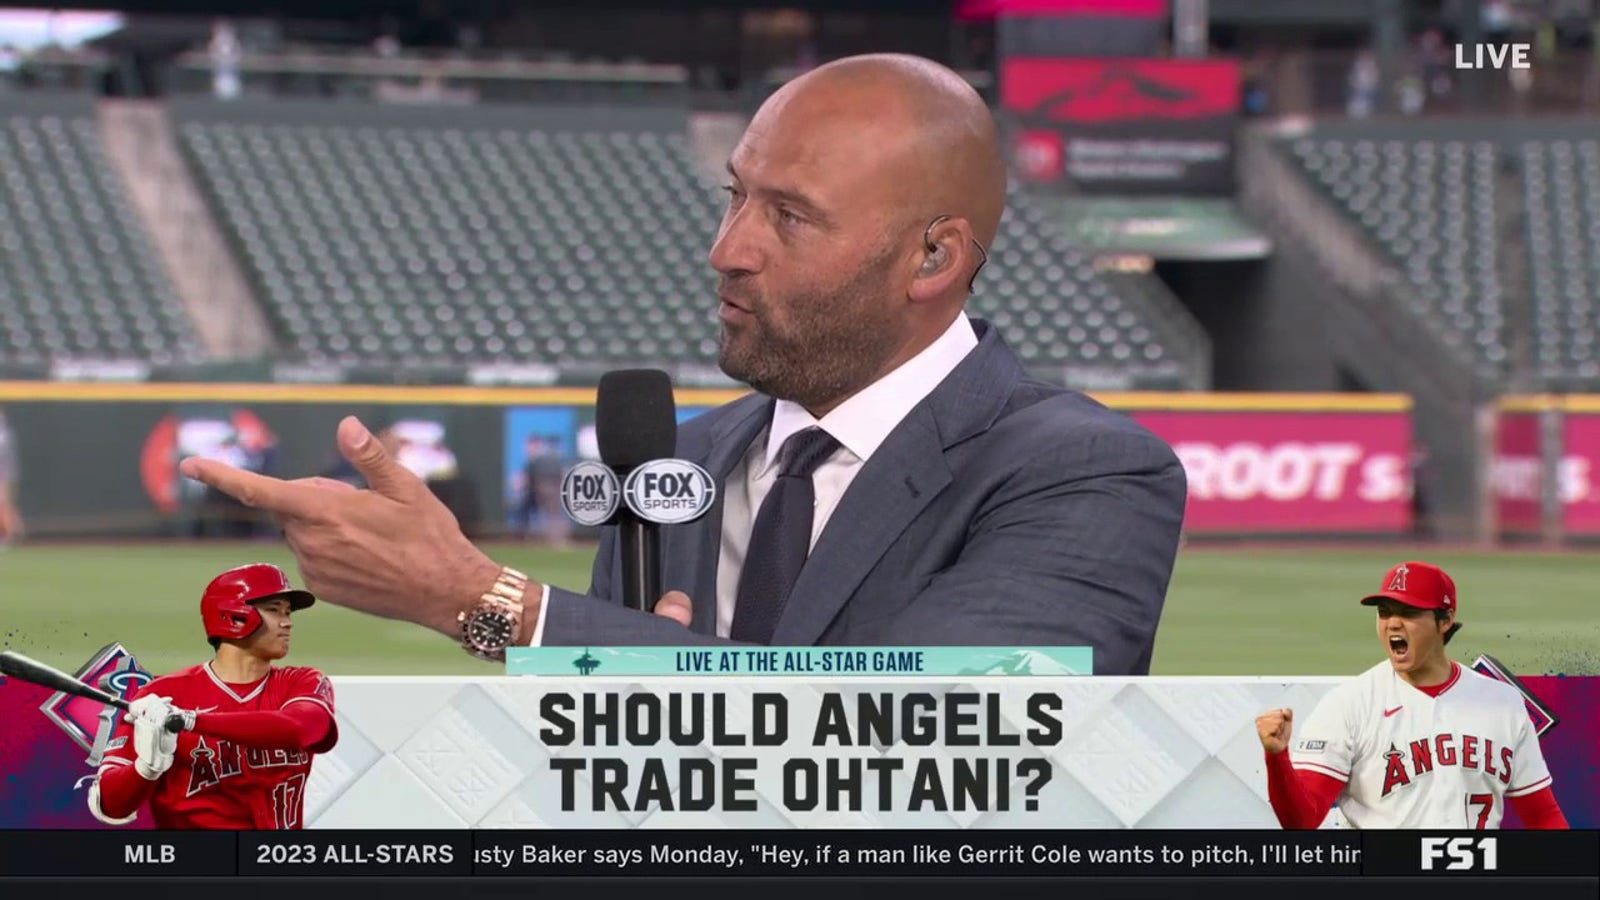 Not trading Shohei Ohtani would be a massive mistake for the Angels FOX Sports